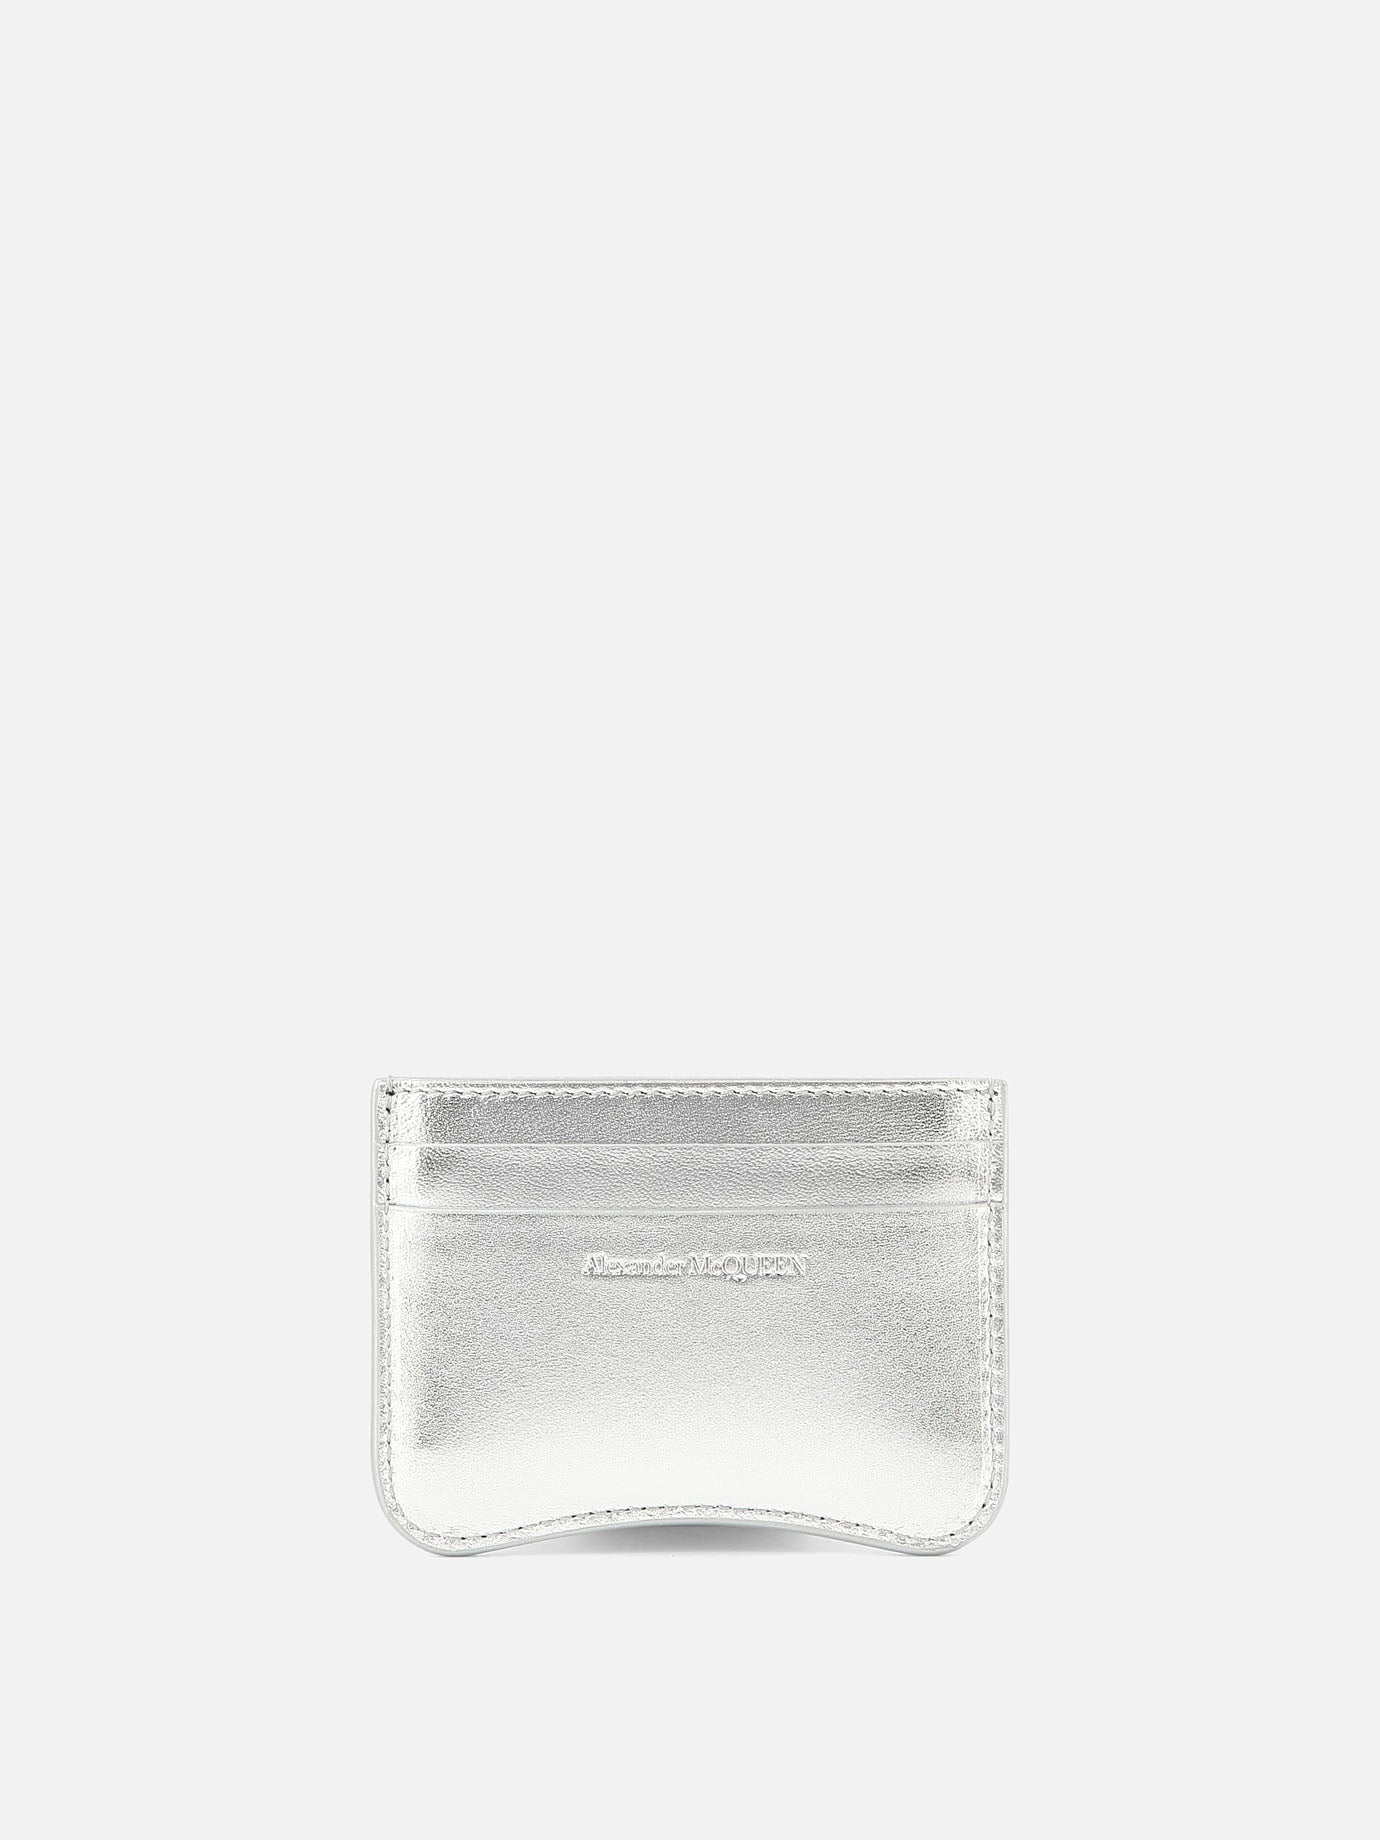 "The Seal" card holder